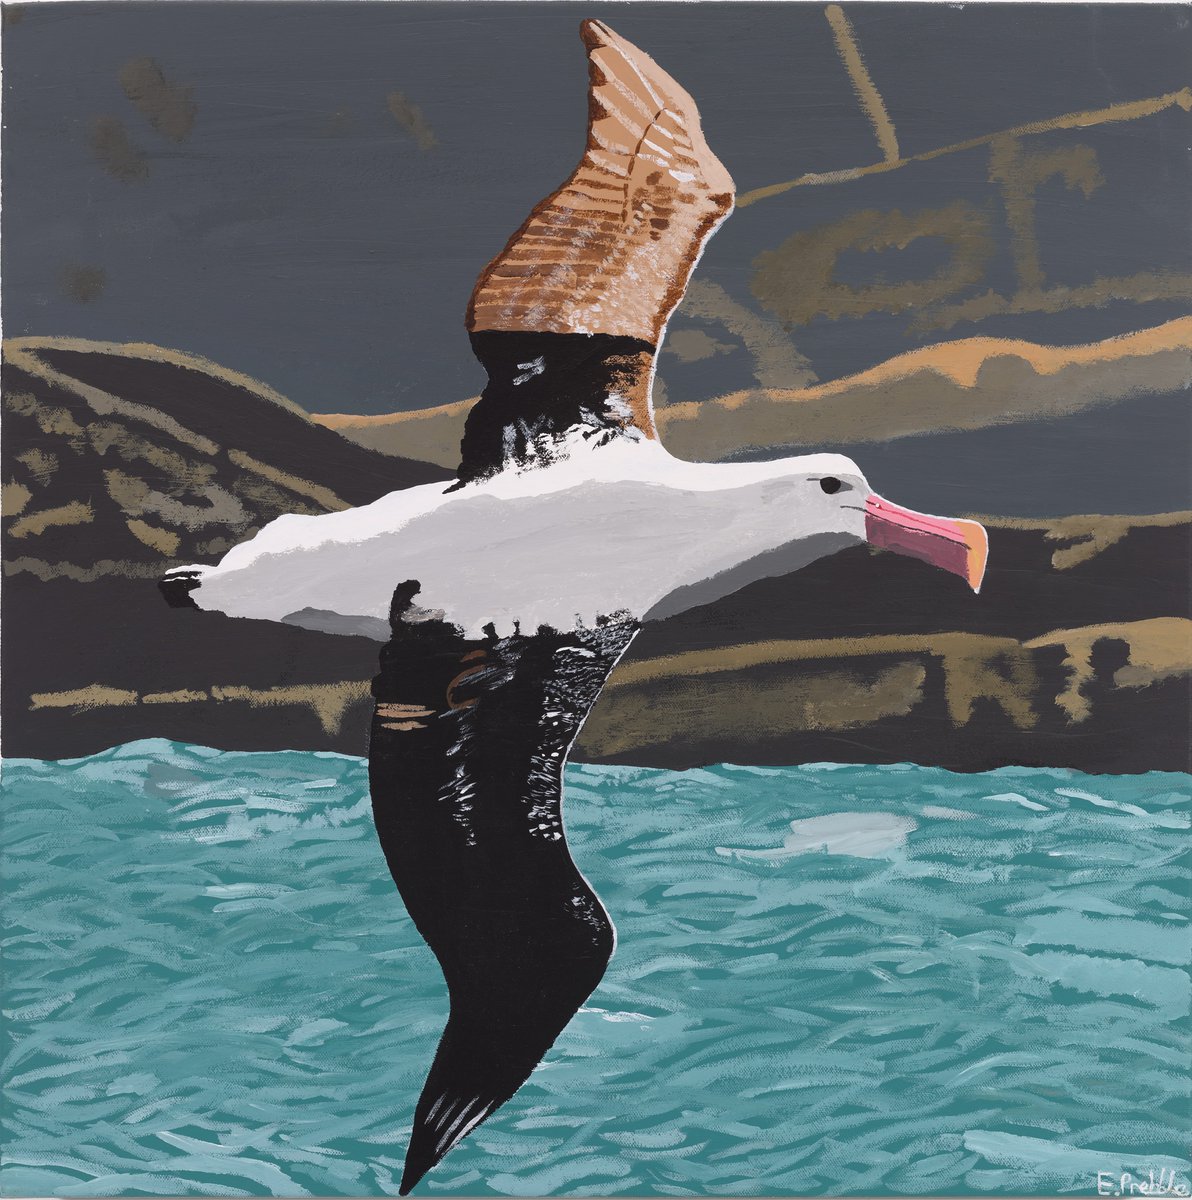 Only two weeks left to see the amazing artworks in the Ellen Prebble exhibition!

Albatross, Acrylic on canvas, 2021

#EllenPrebble #ProjectartWorks